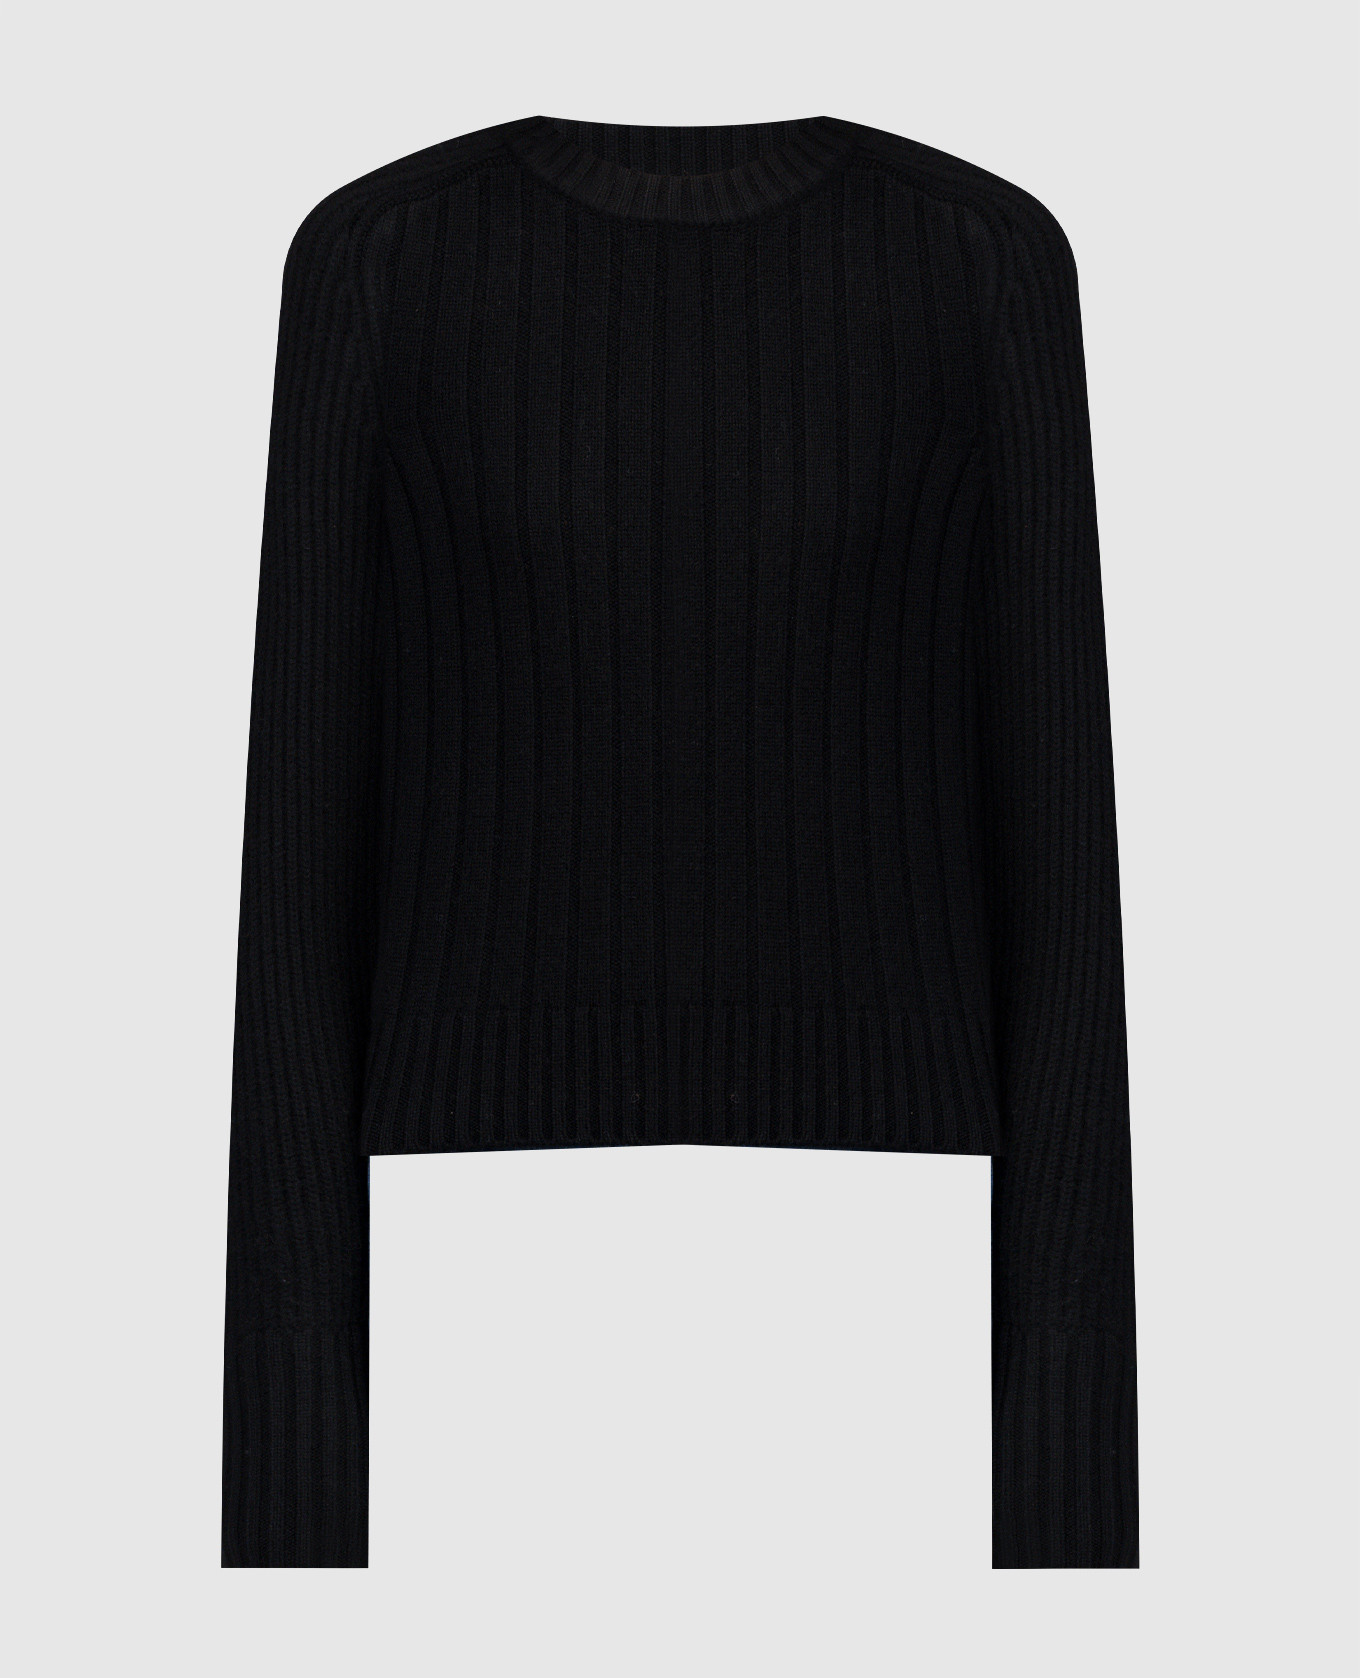 Black ribbed wool and cashmere sweater